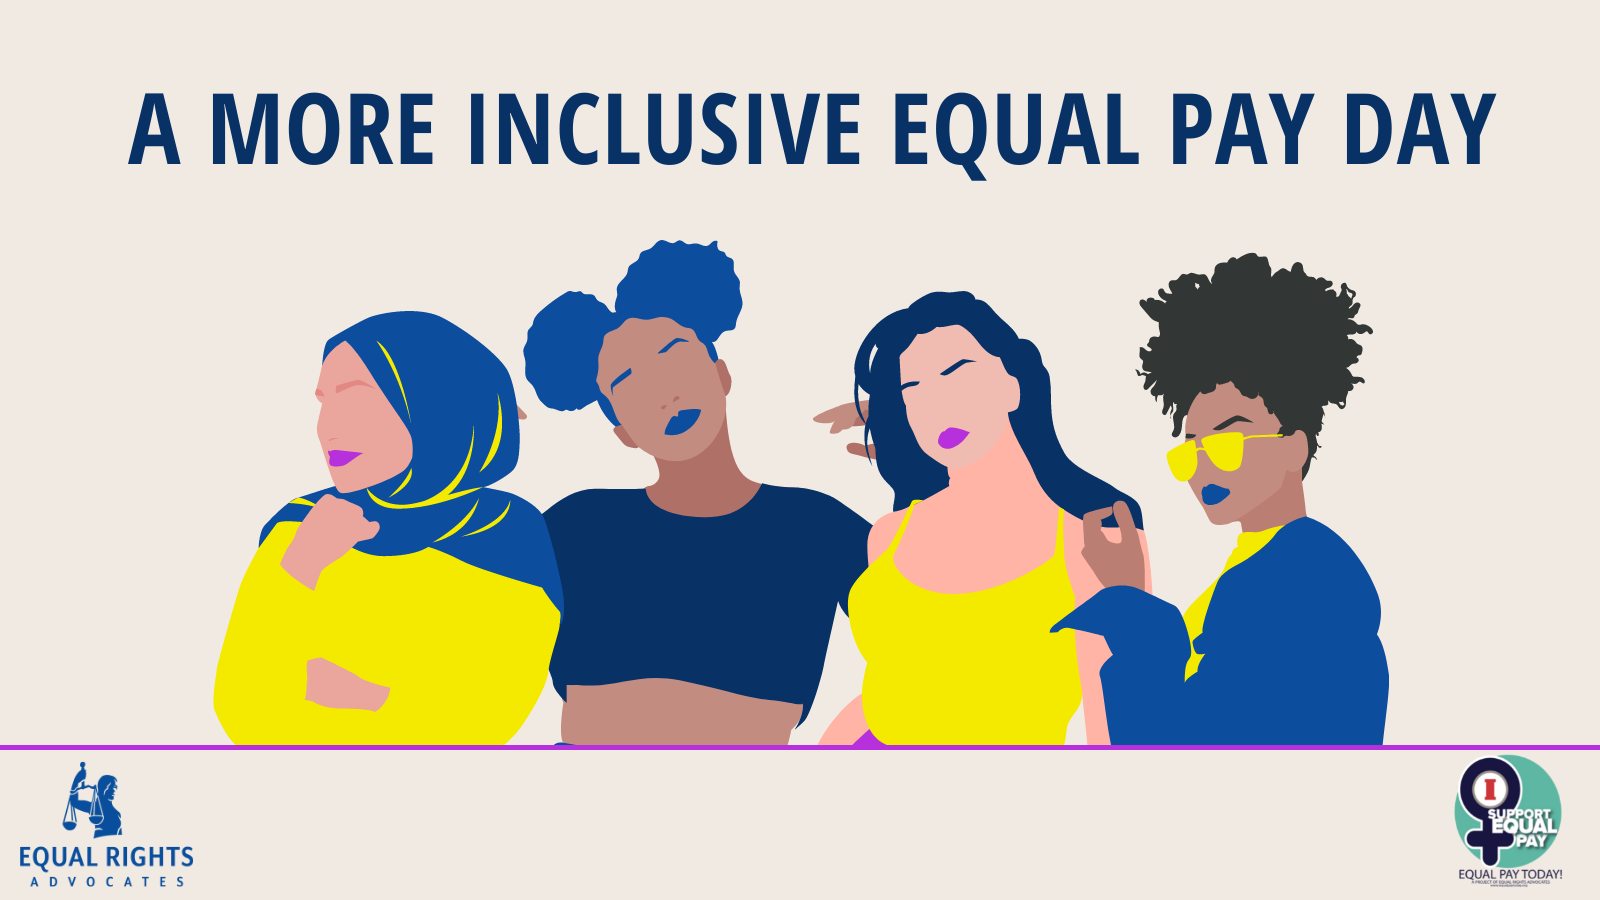 A More Inclusive Equal Pay Day event